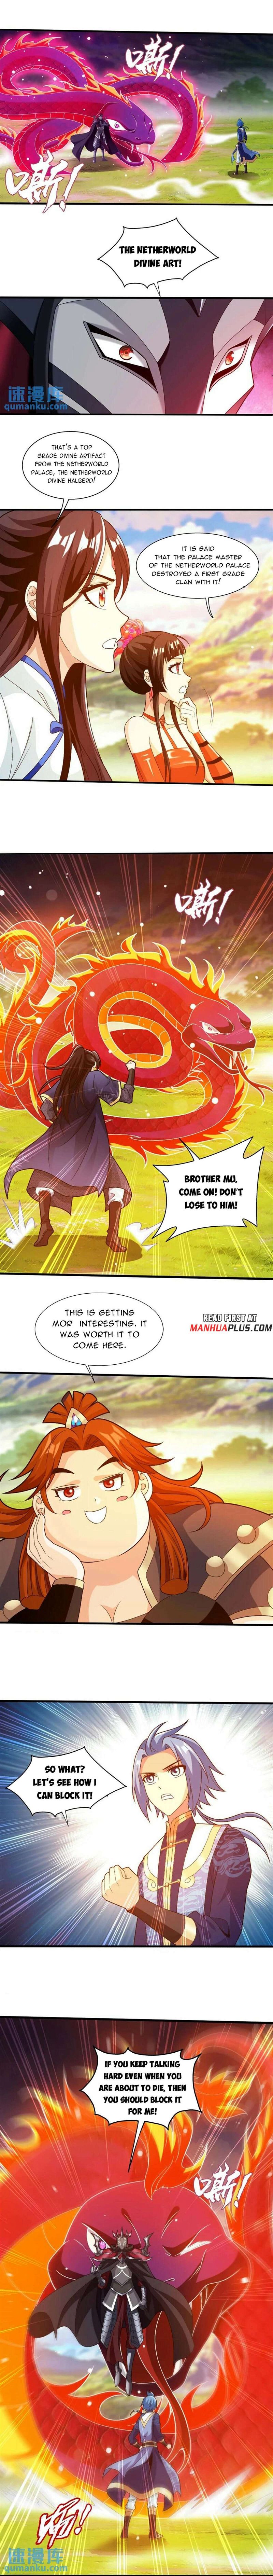 The Great Ruler Chapter 449 page 5